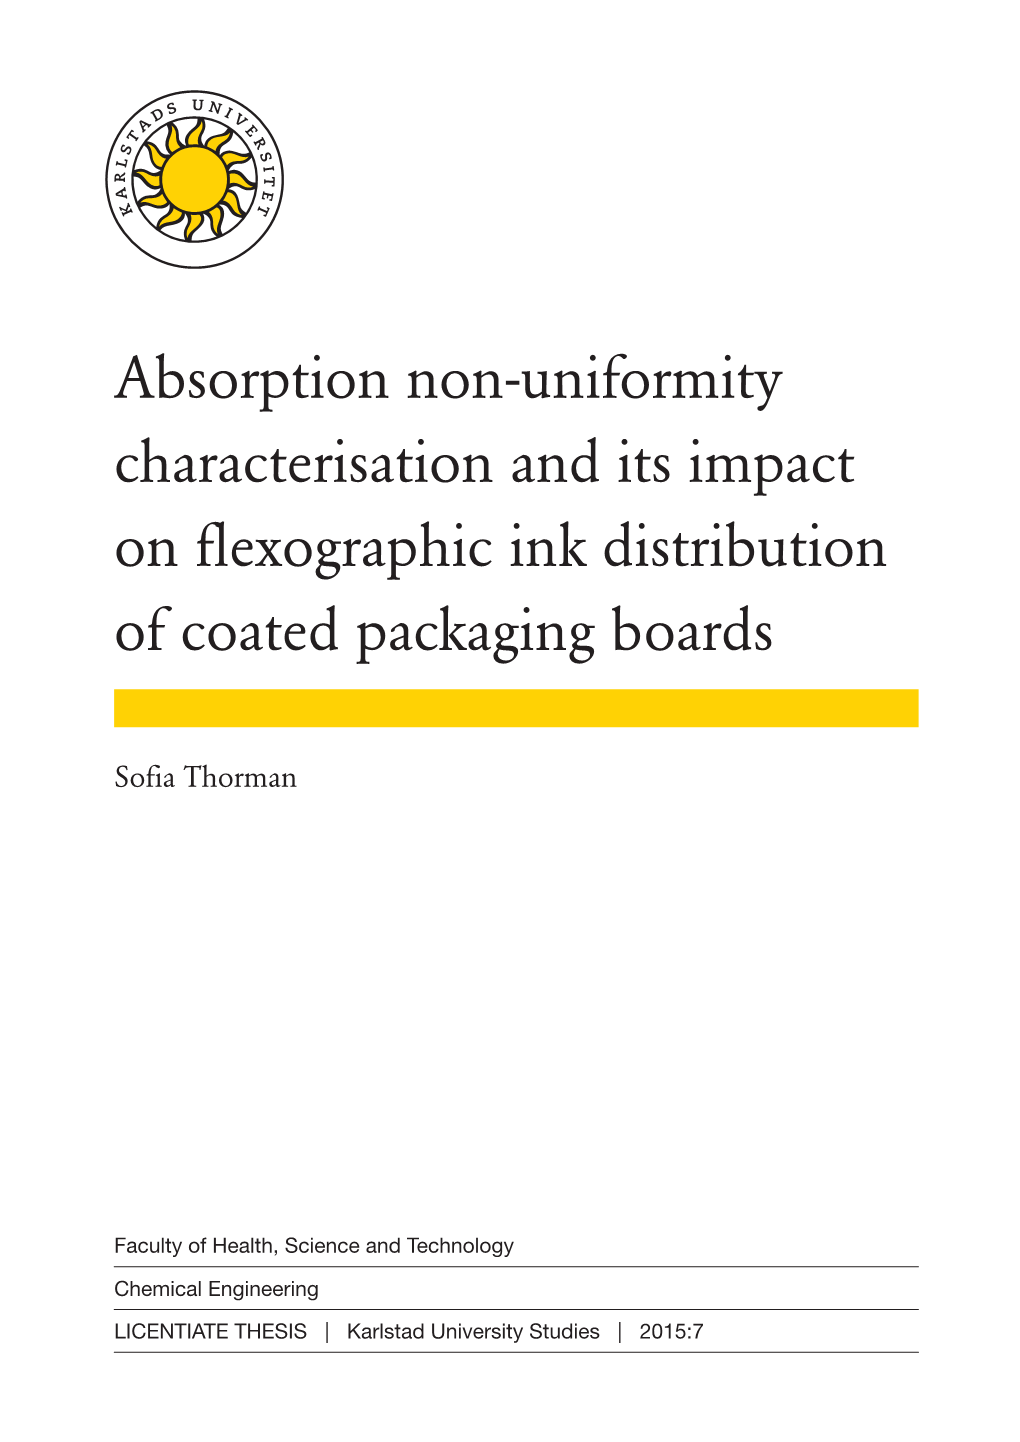 Absorption Non-Uniformity Characterisation and Its Impact on Flexographic Ink Distribution of Coated Packaging Boards